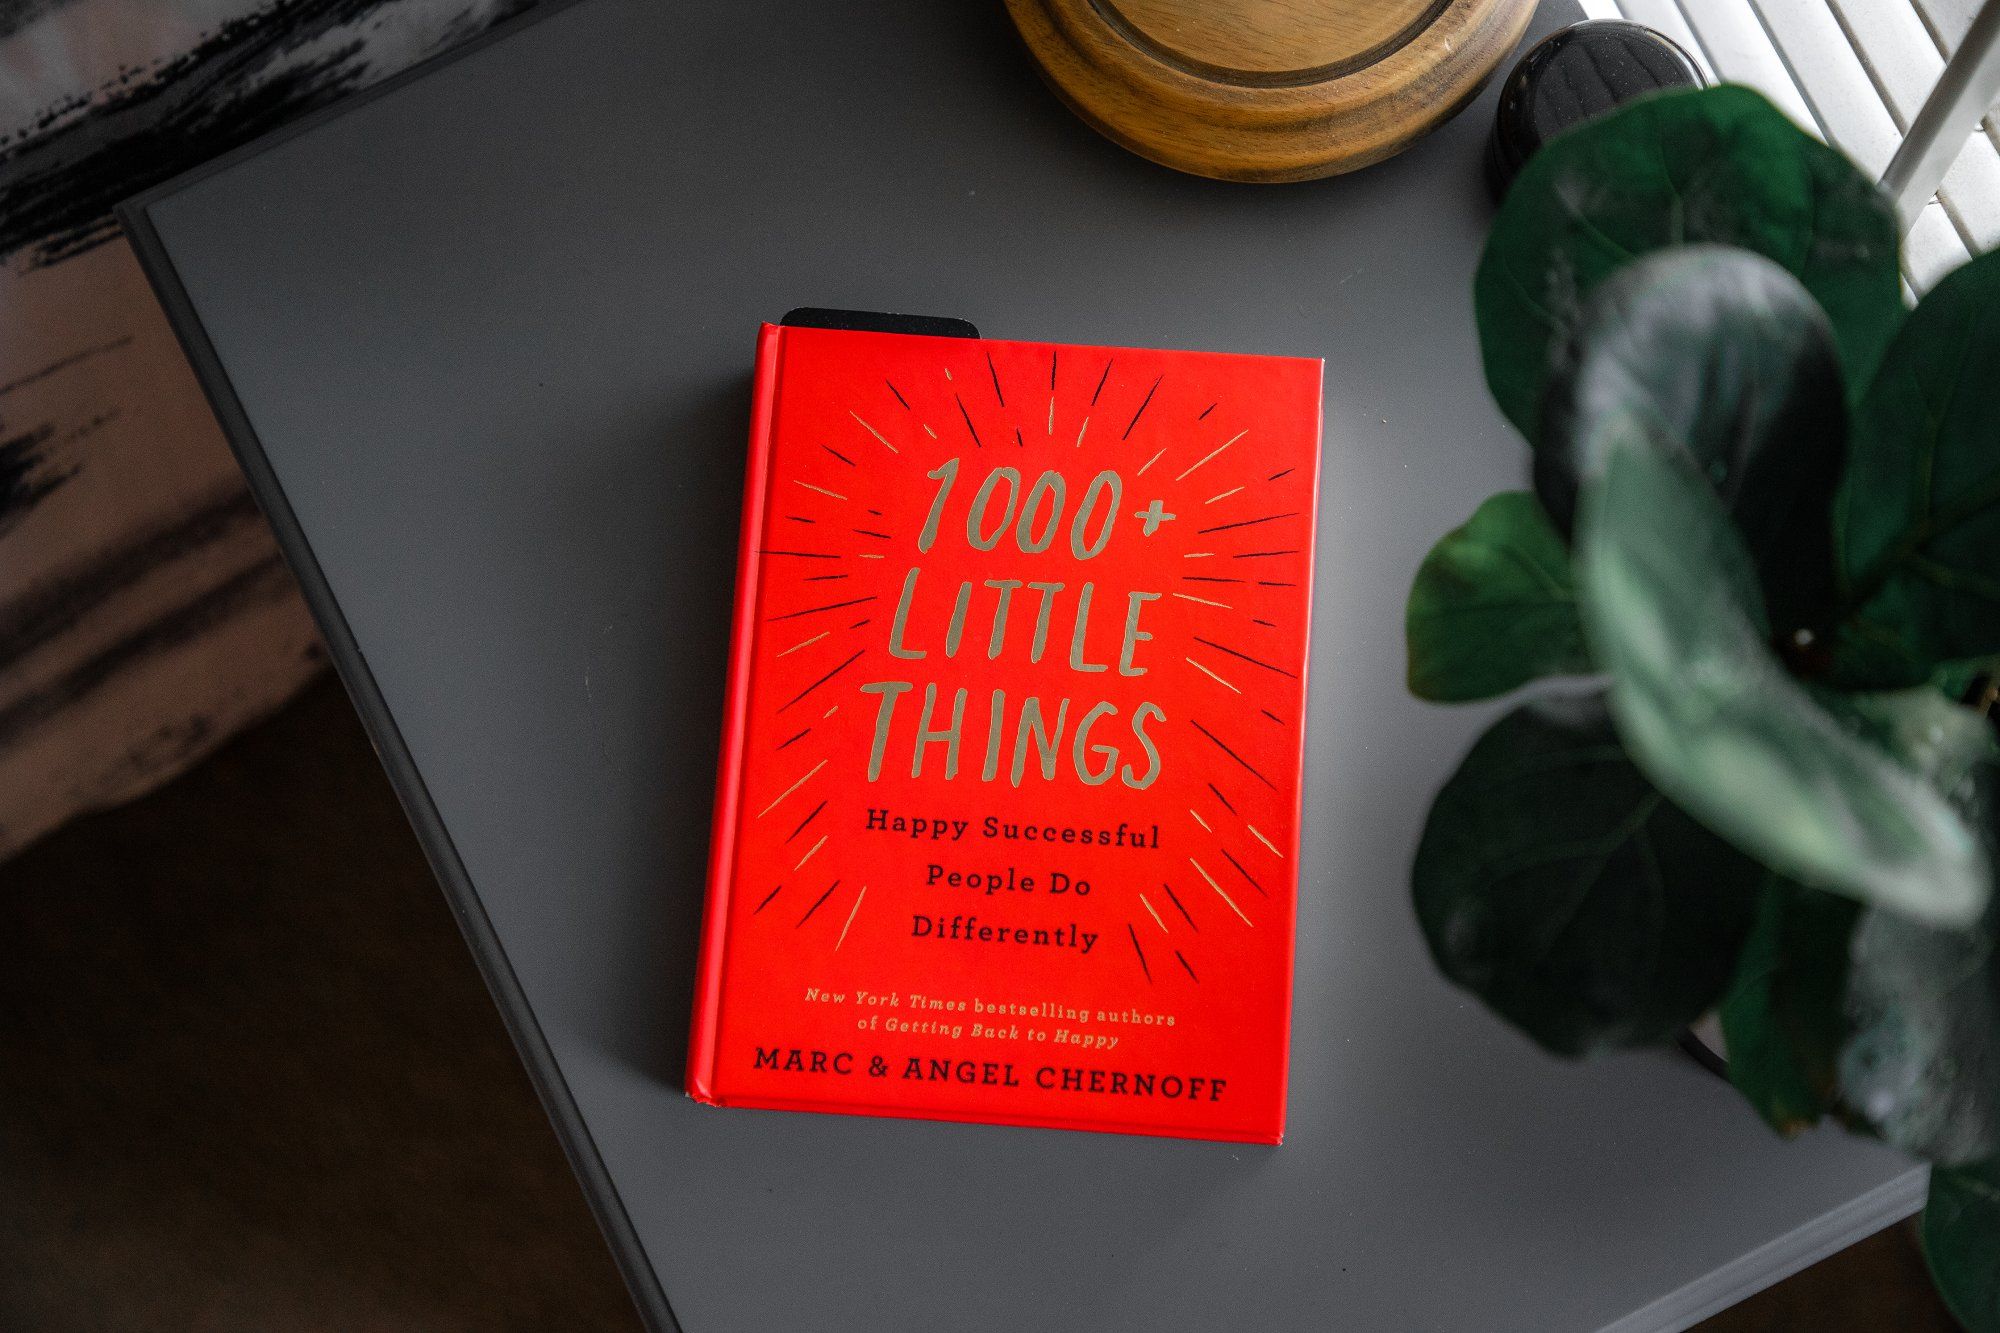 A 1000+ Little Things Happy Successful People Do Differently book by Marc & Angel Chernoff lying on a bookstand by the window